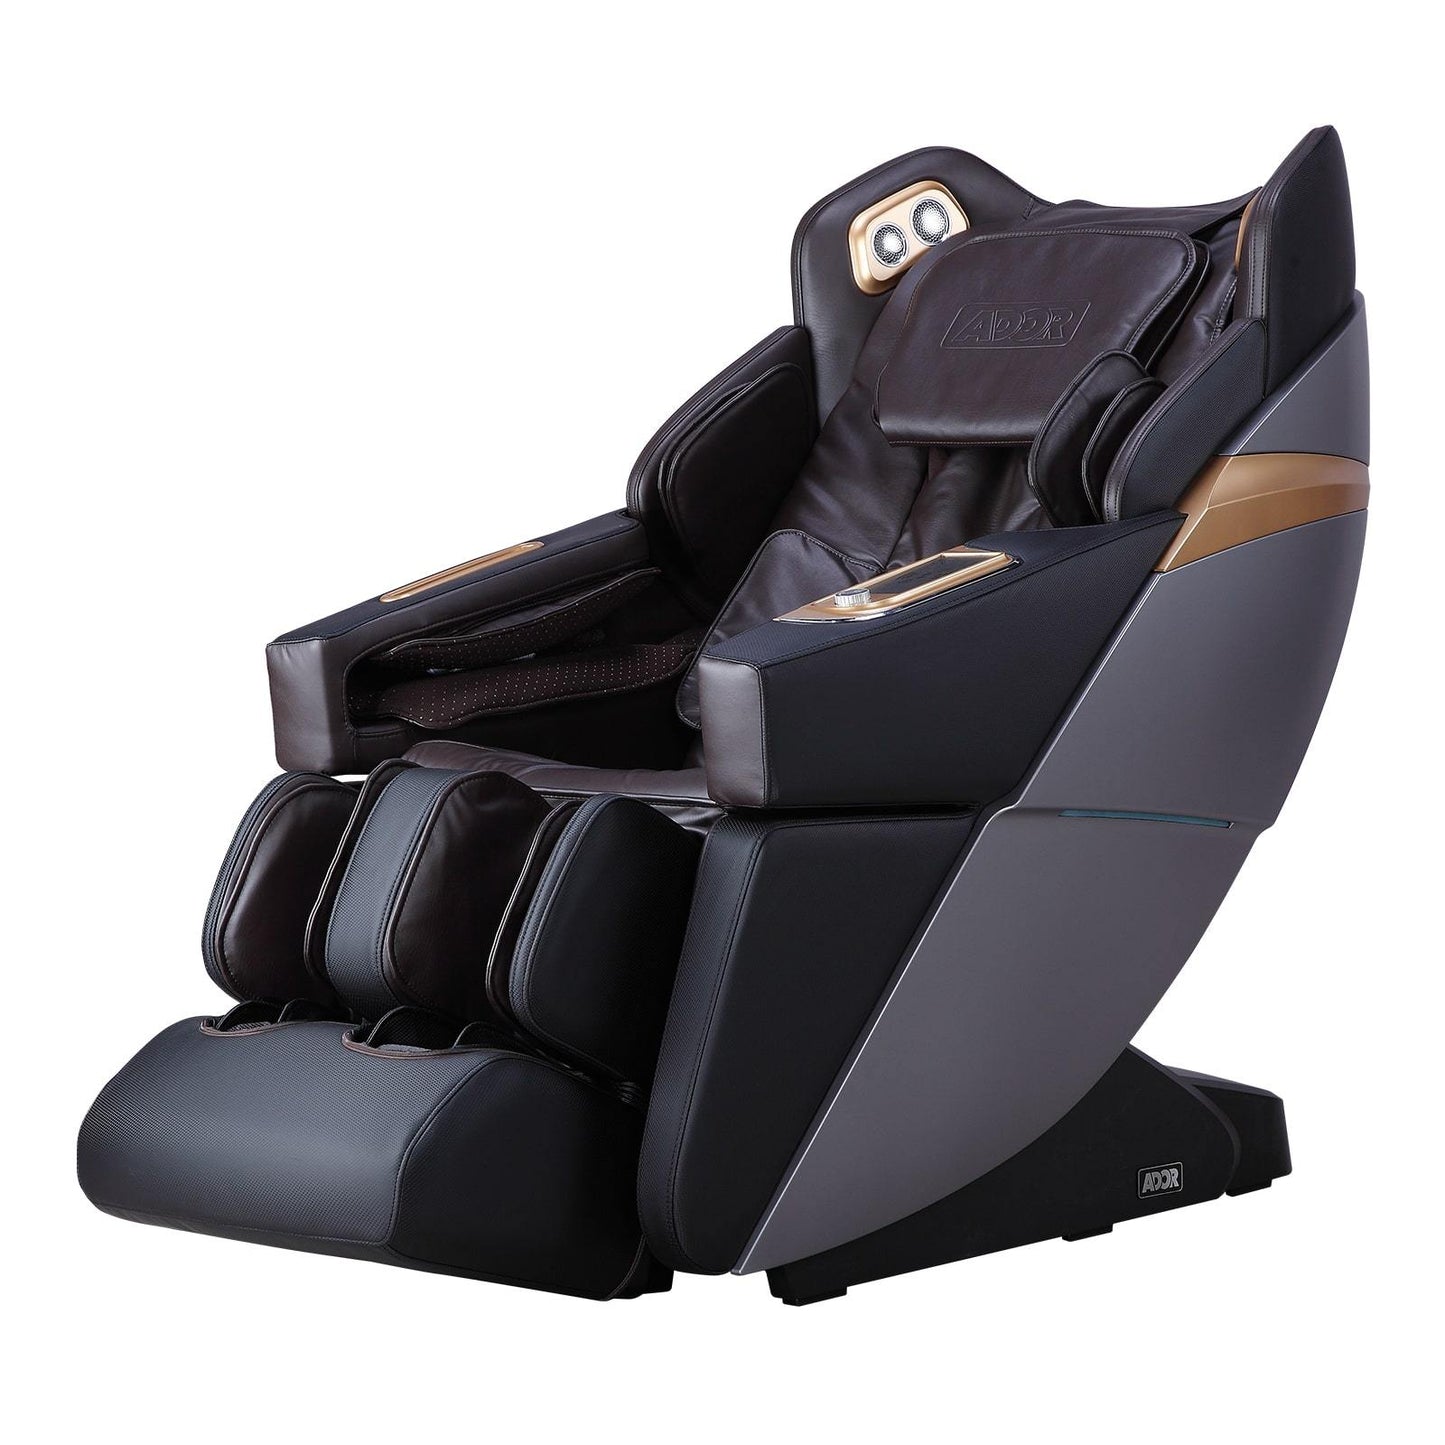 Ador 3D Allure Black & Brown / Curbside Delivery - Free / 1 Year(Parts/Labor) 2&3 Year(Parts Only) - Free titan-chair